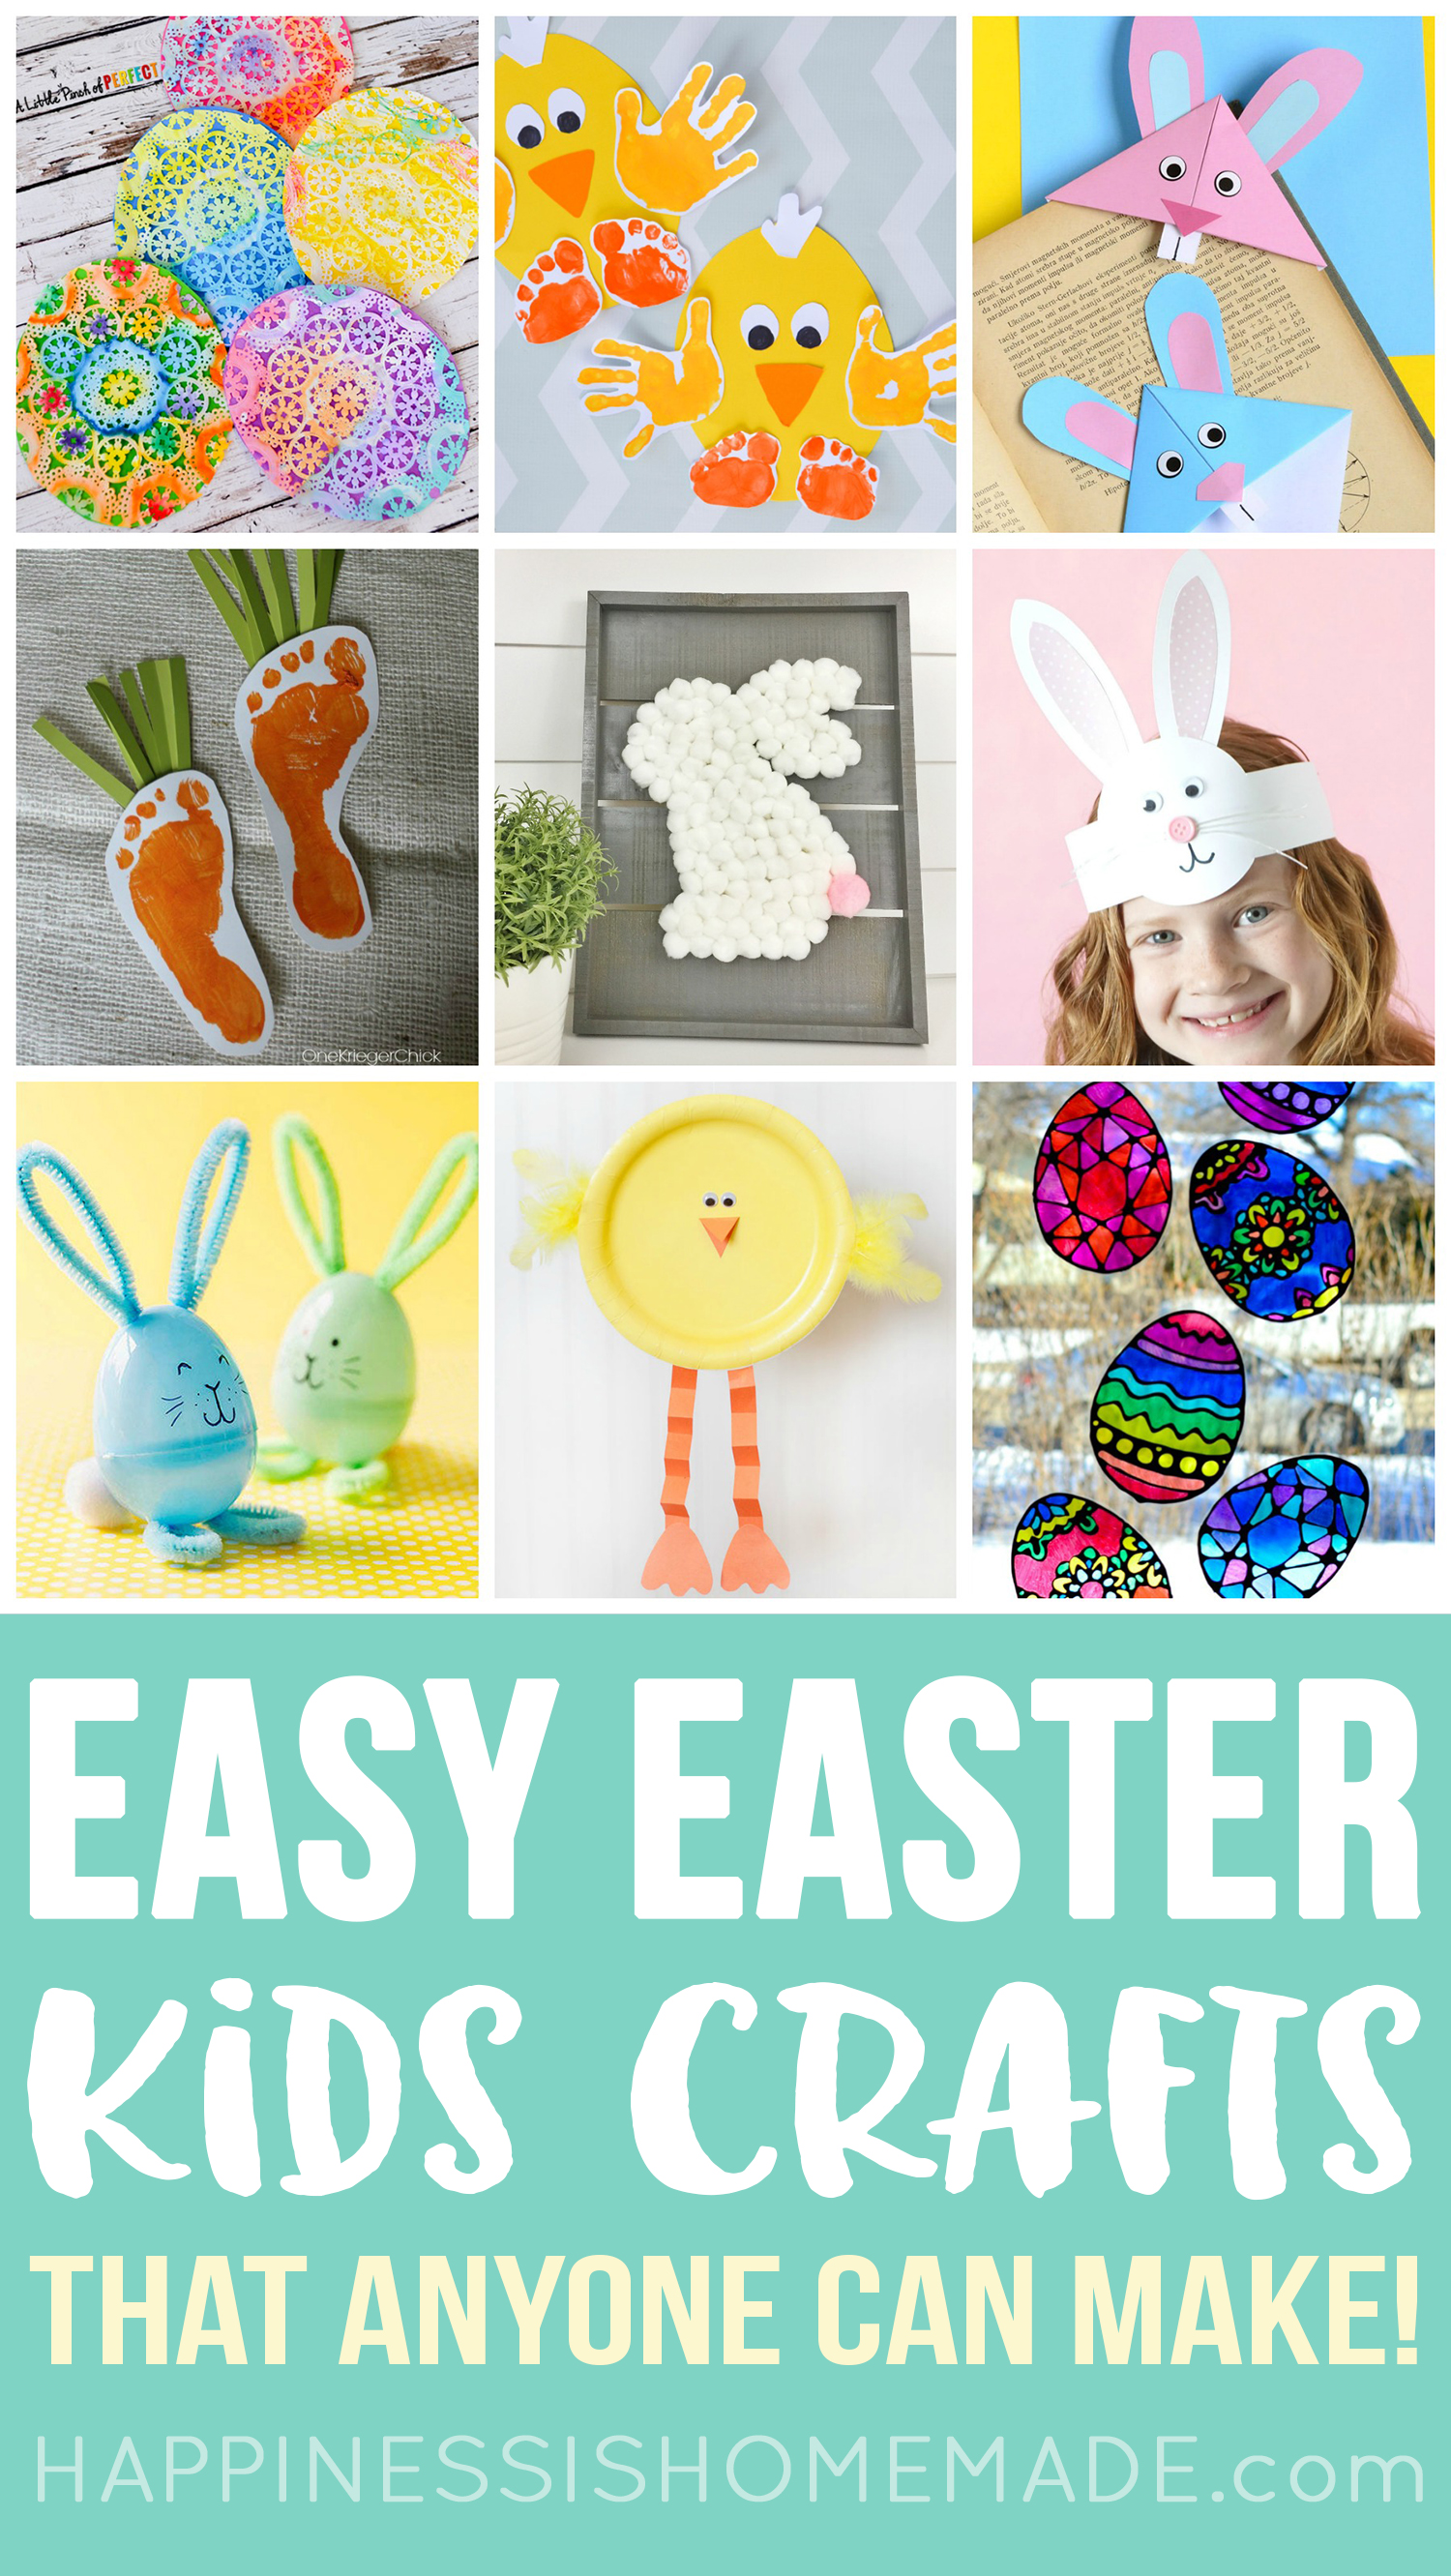 Over 33 Easter Craft Ideas for Kids to Make - Simple, Cute and Fun!